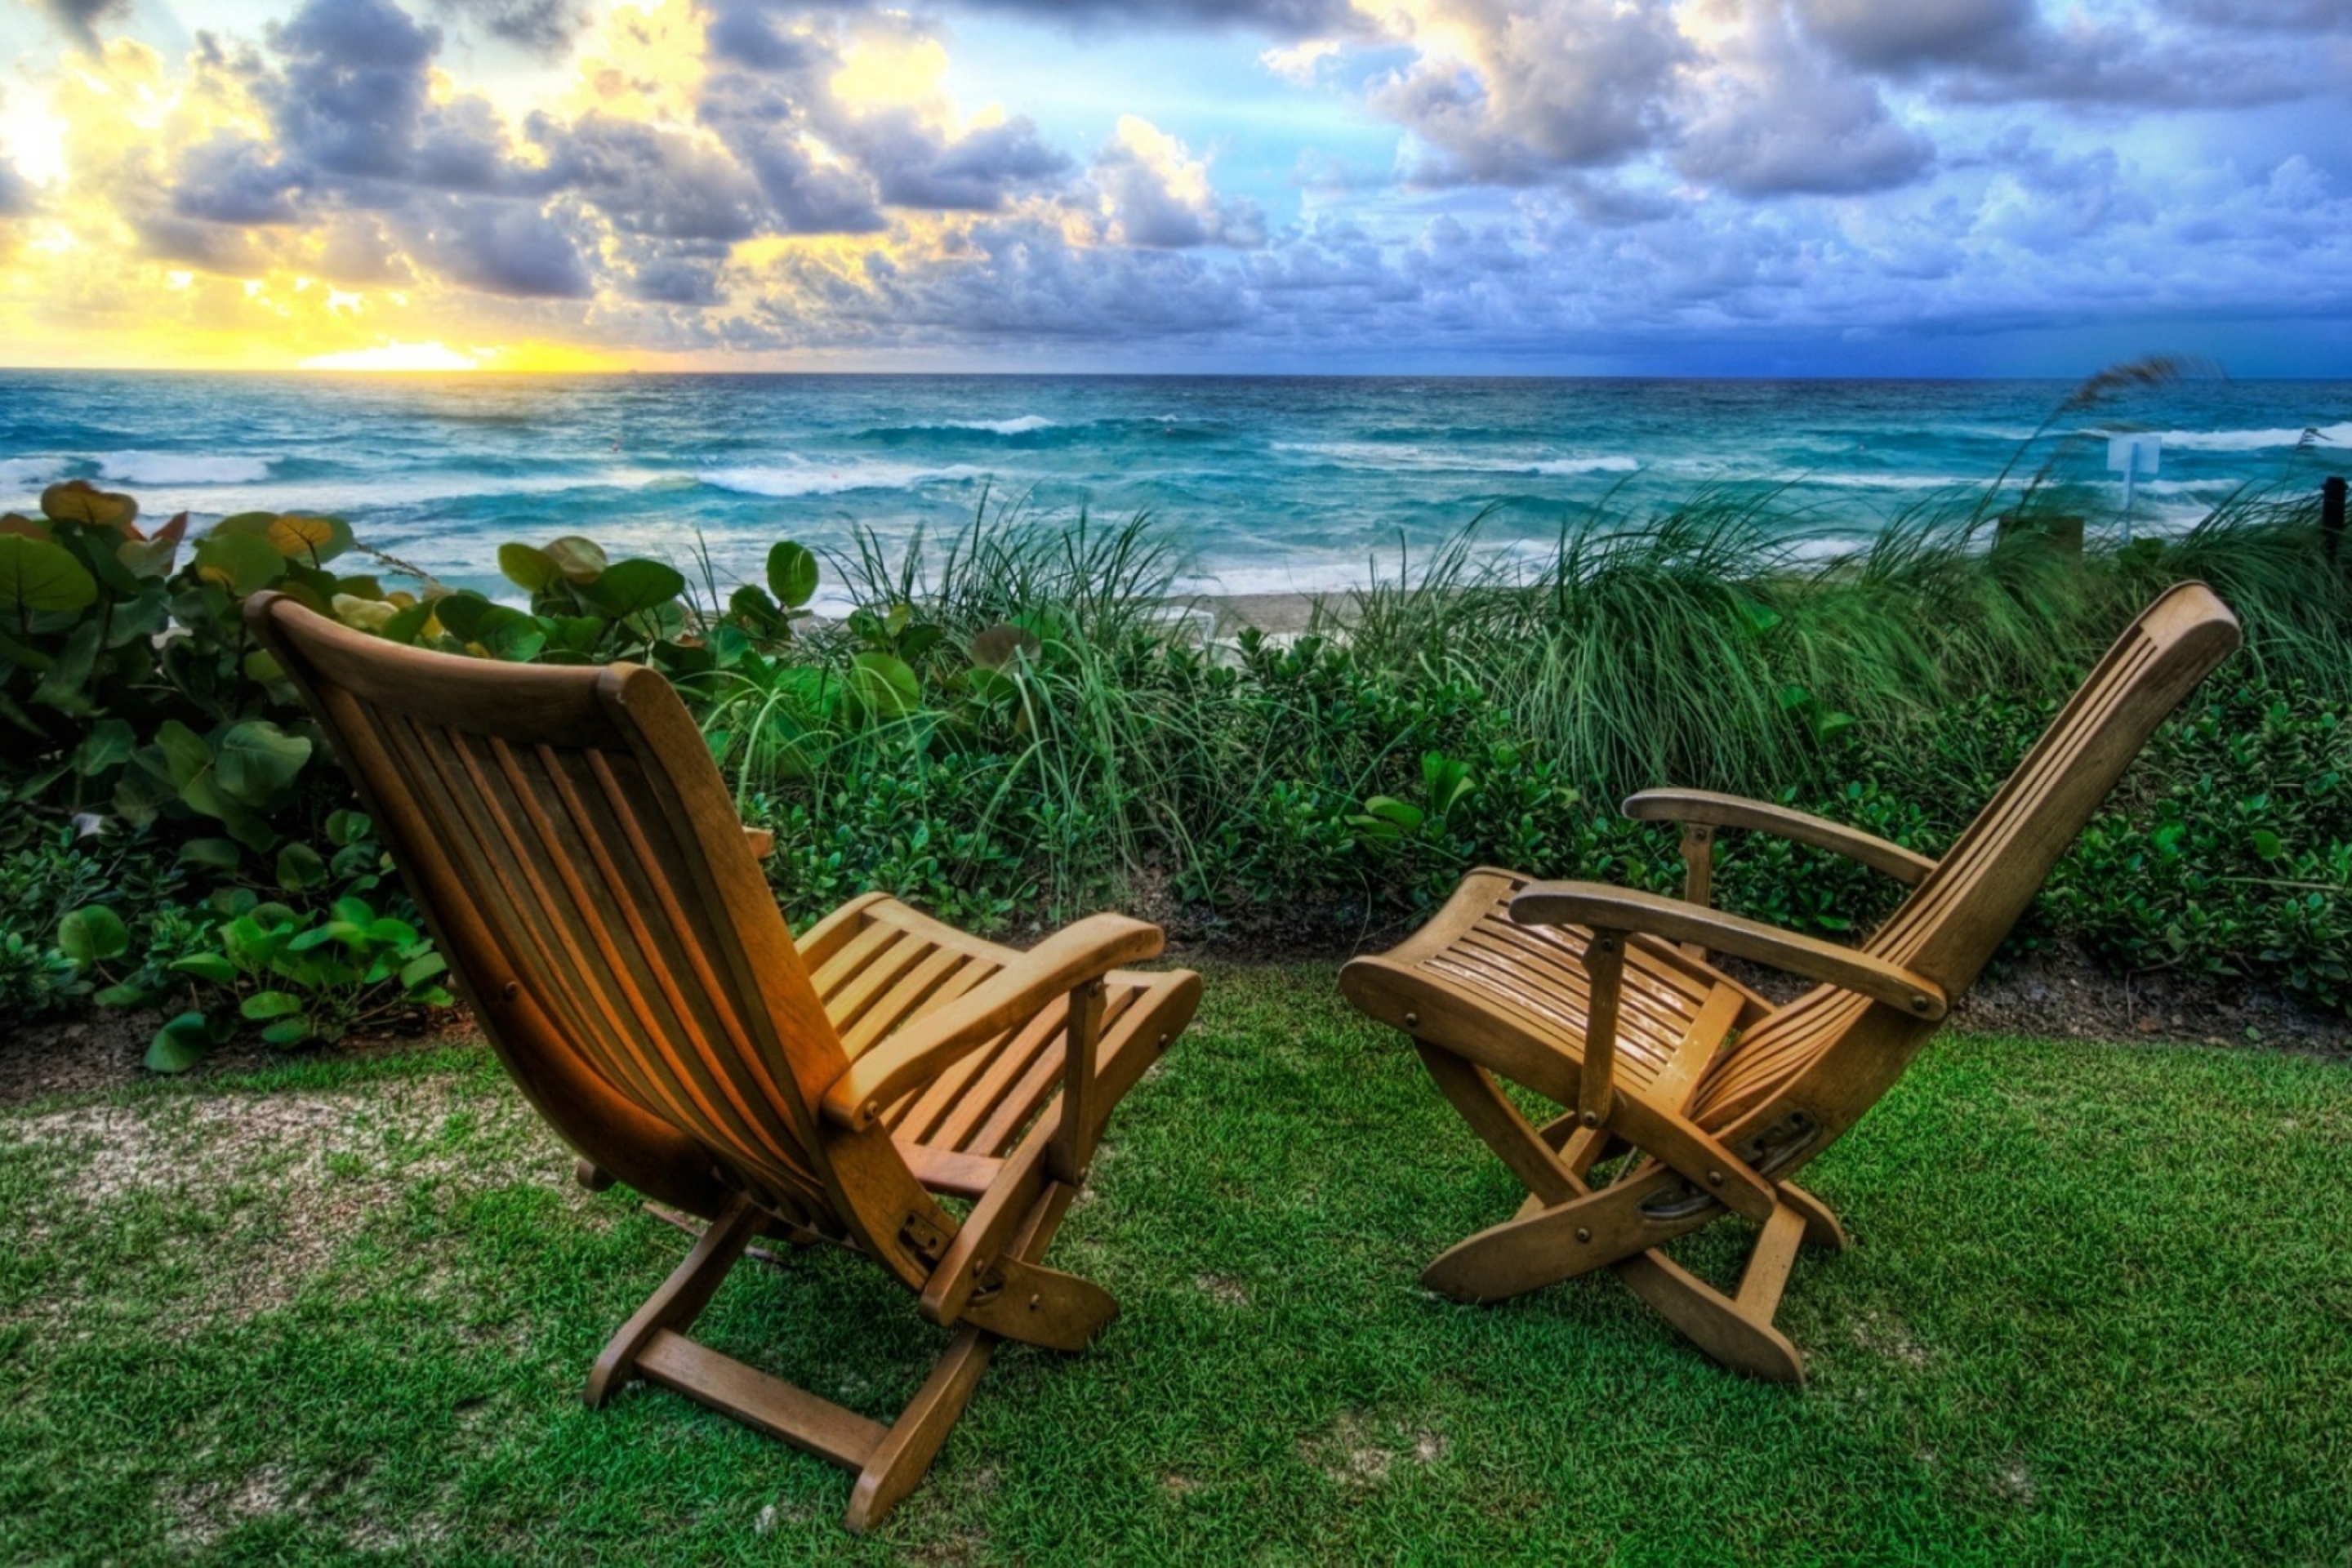 Chairs With Sea View wallpaper 2880x1920